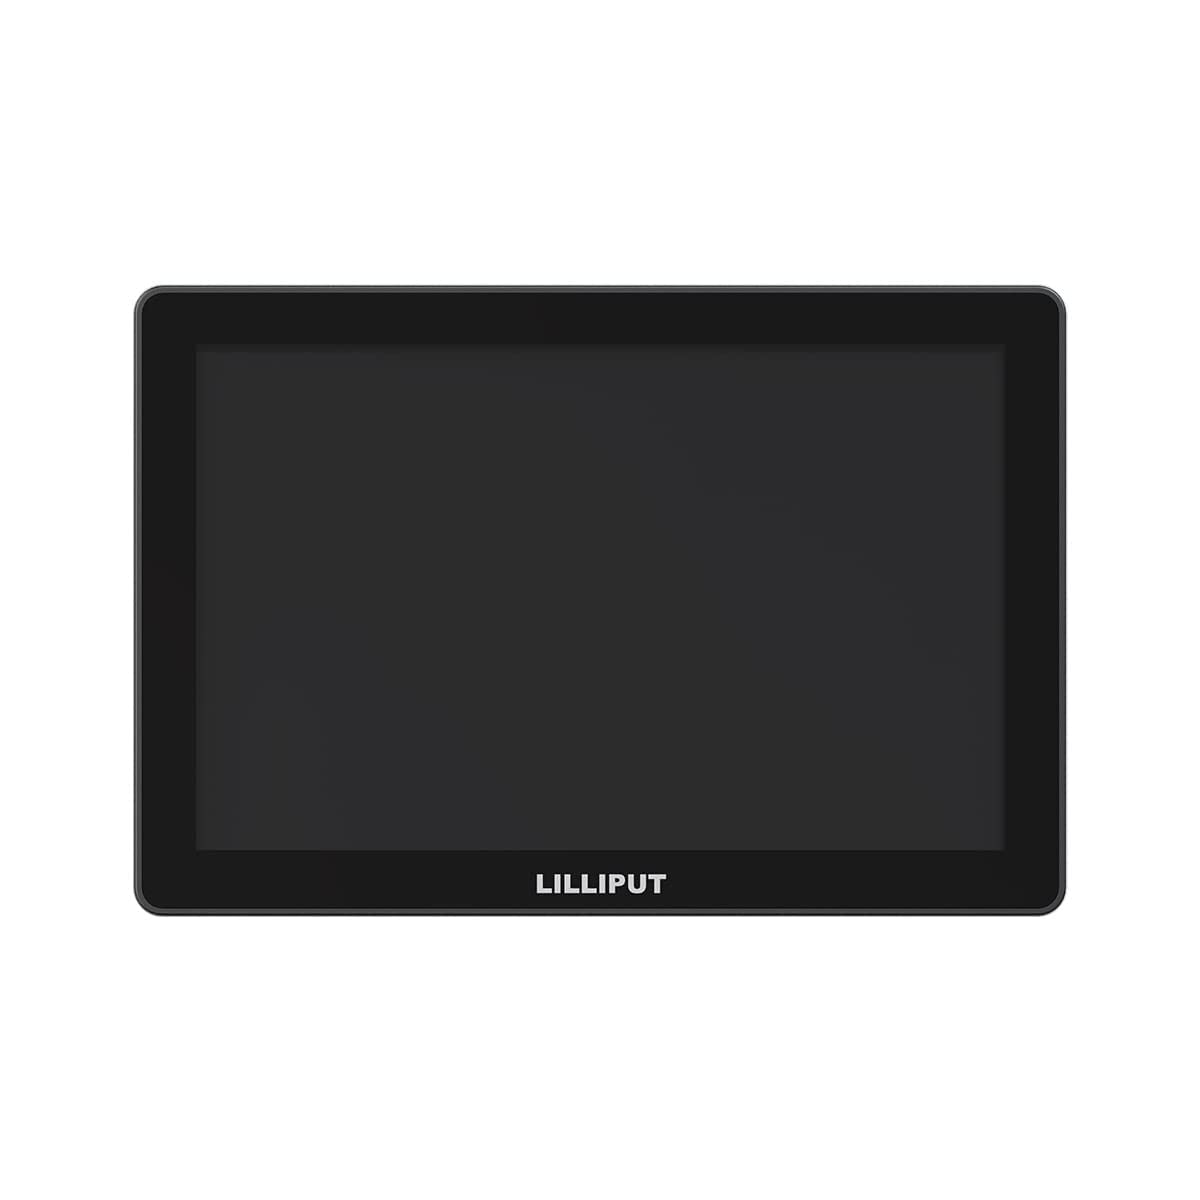 LILLIPUT HT series 2000nits Ultra-Bright Touch Control Screen with HDMI 2.0 3G-SDI Input Output LANC 3D-LUT Waveform Histogram 5